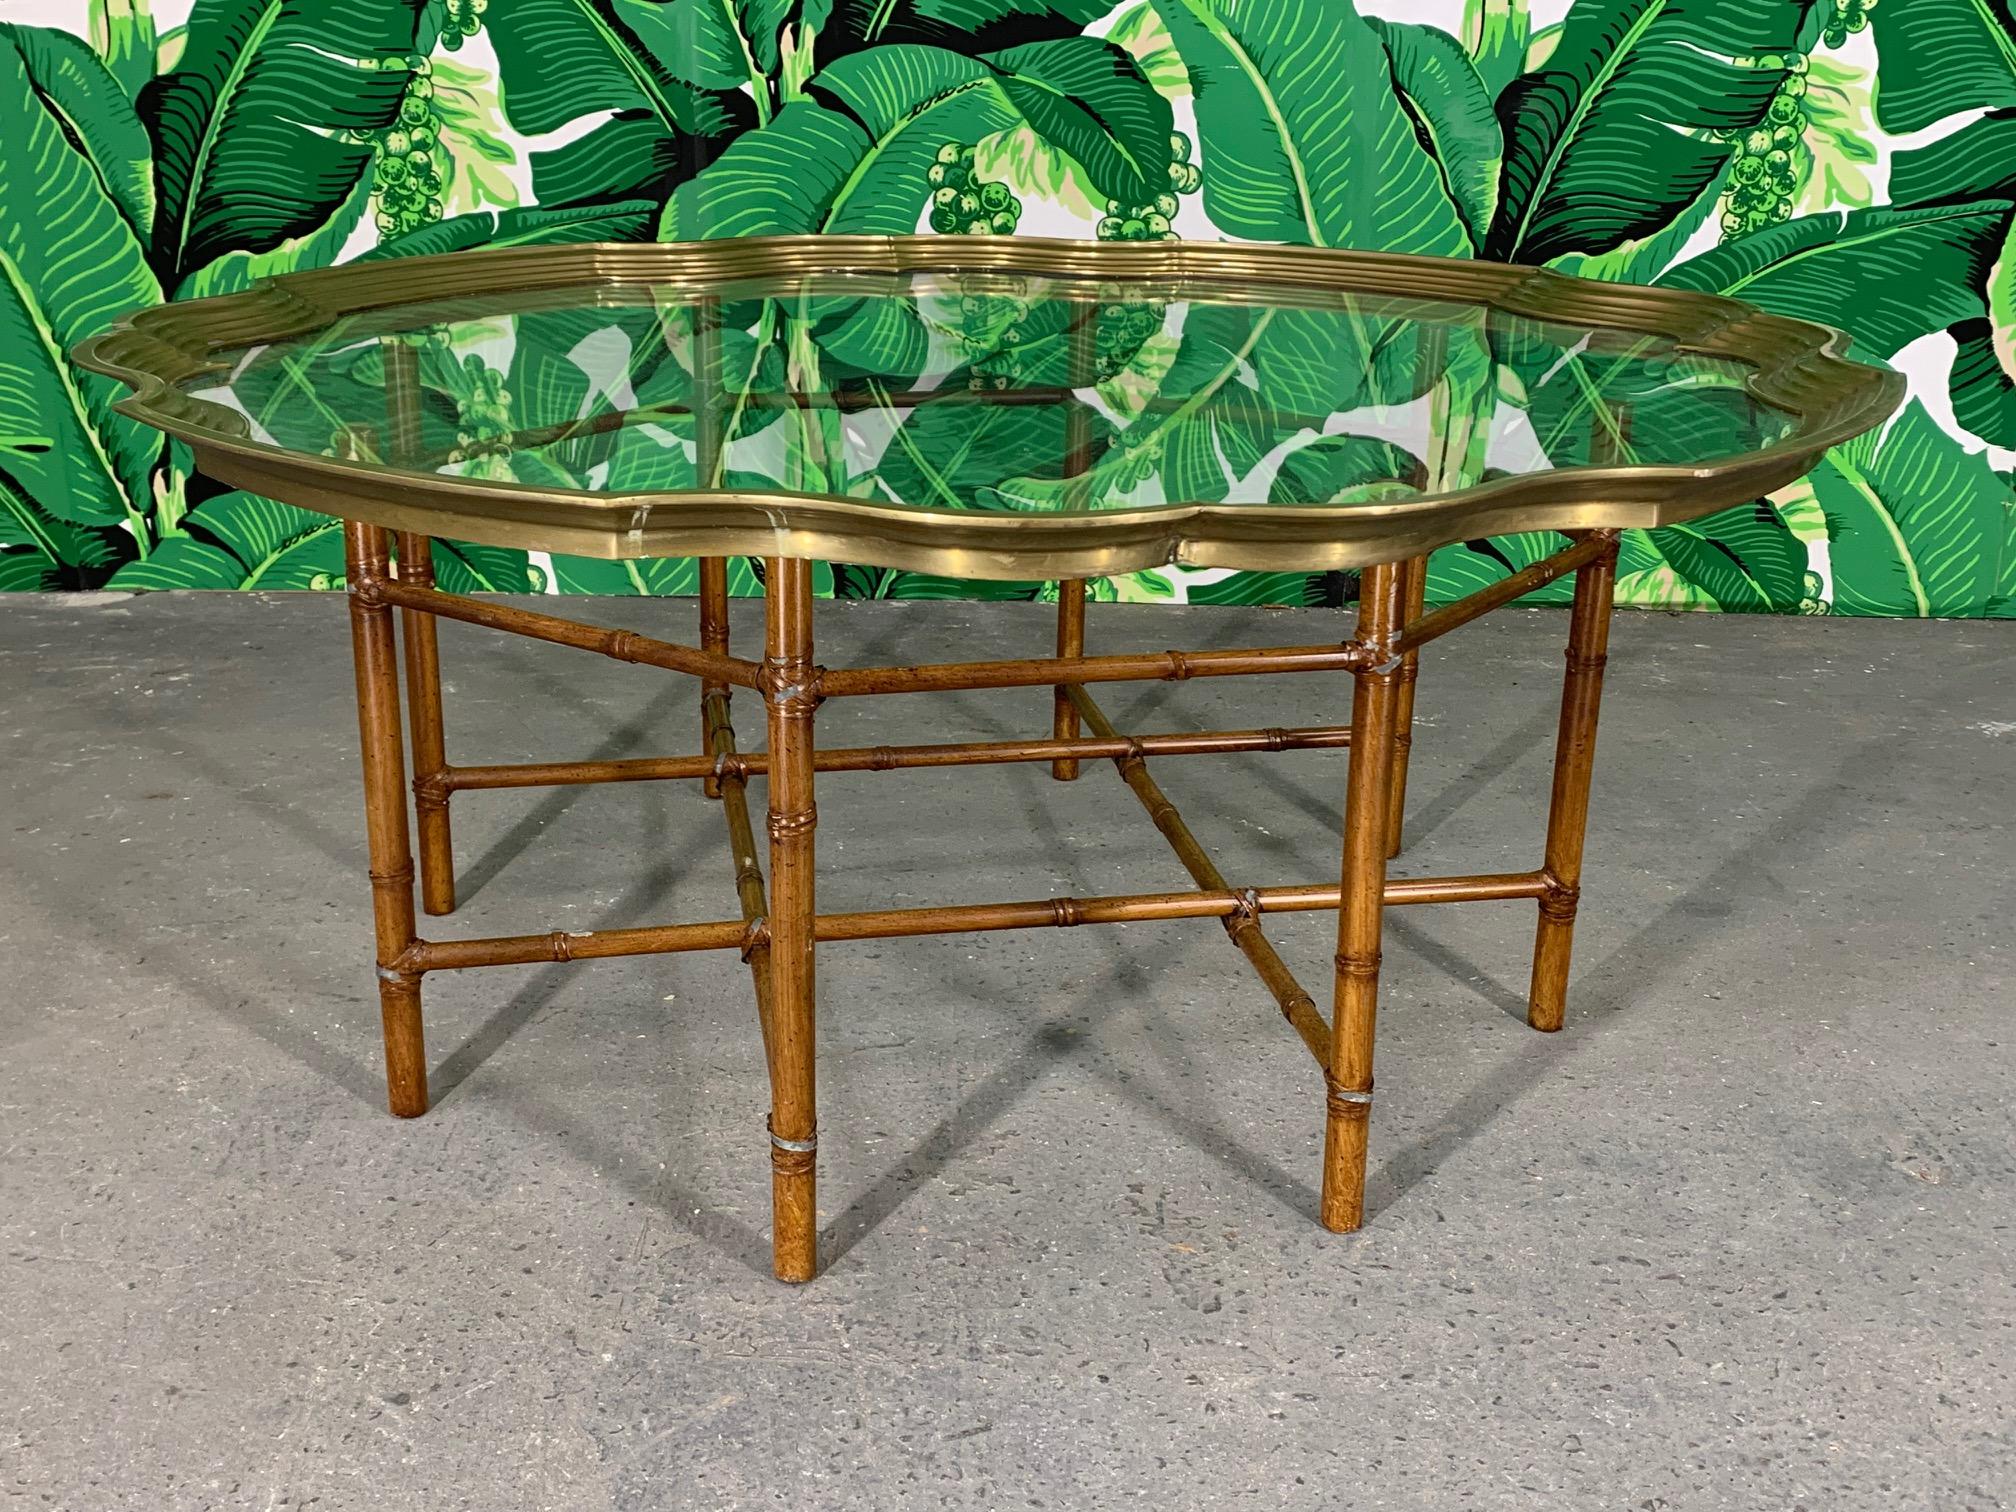 Vintage faux bamboo coffee/cocktail table features metal frame and glass tray top rimmed in solid brass. Good vintage condition with minor imperfections consistent with age.